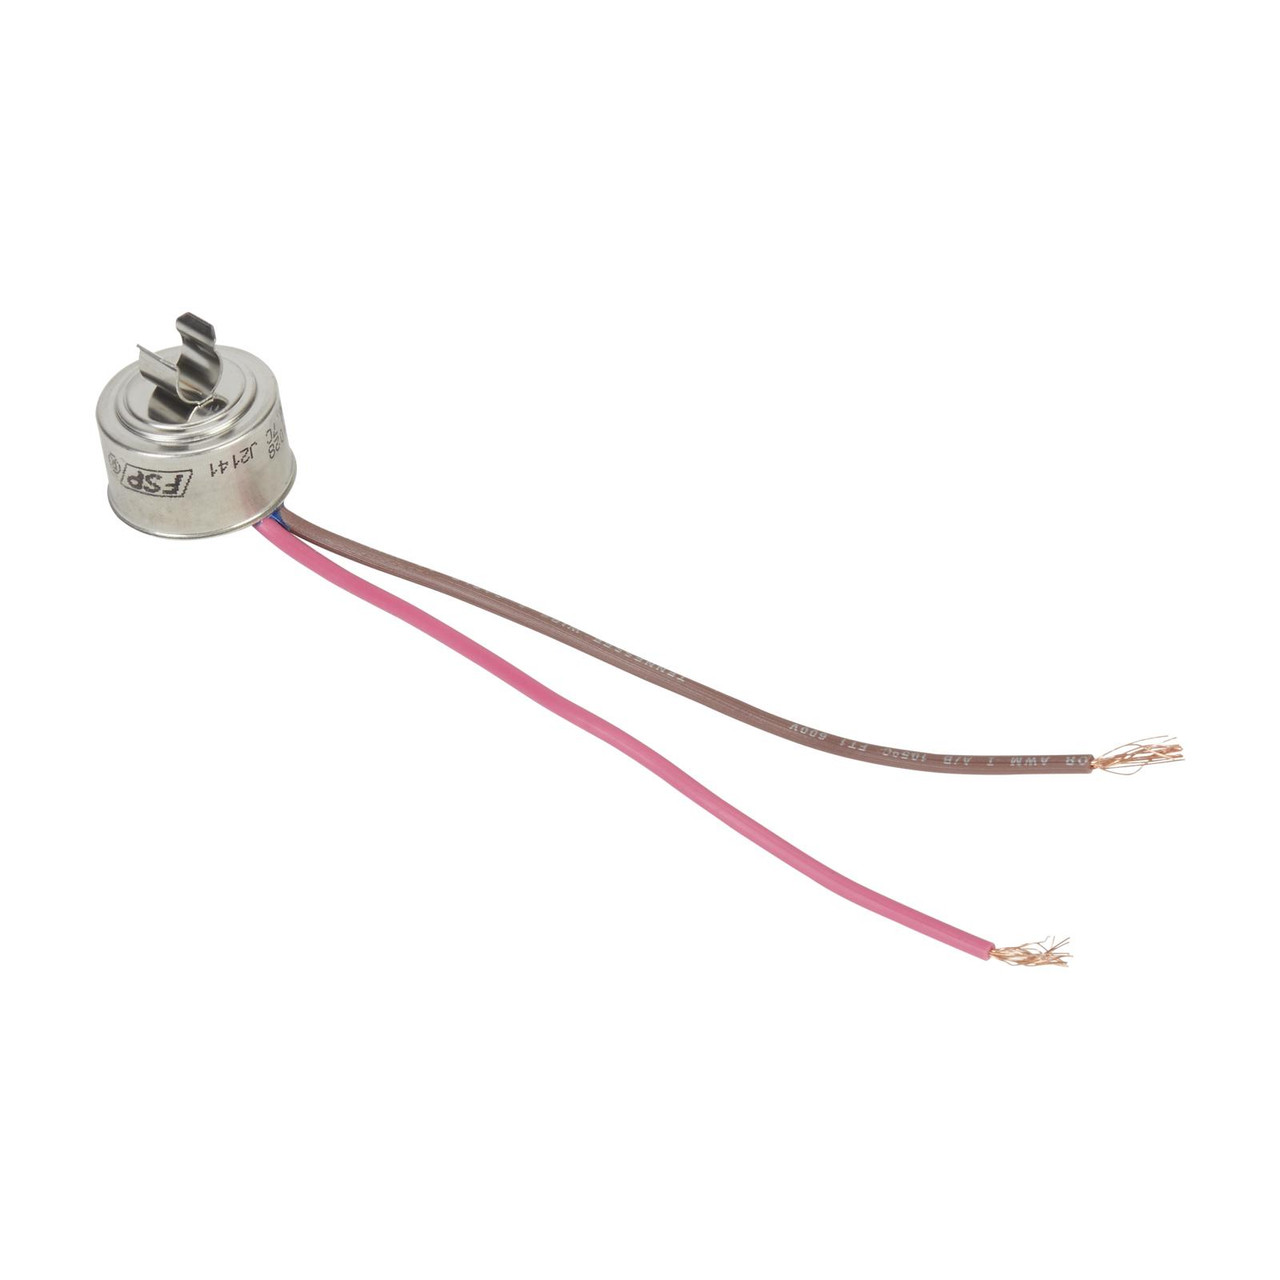 Whirlpool WP4387503 - Refrigerator Defrost Thermostat